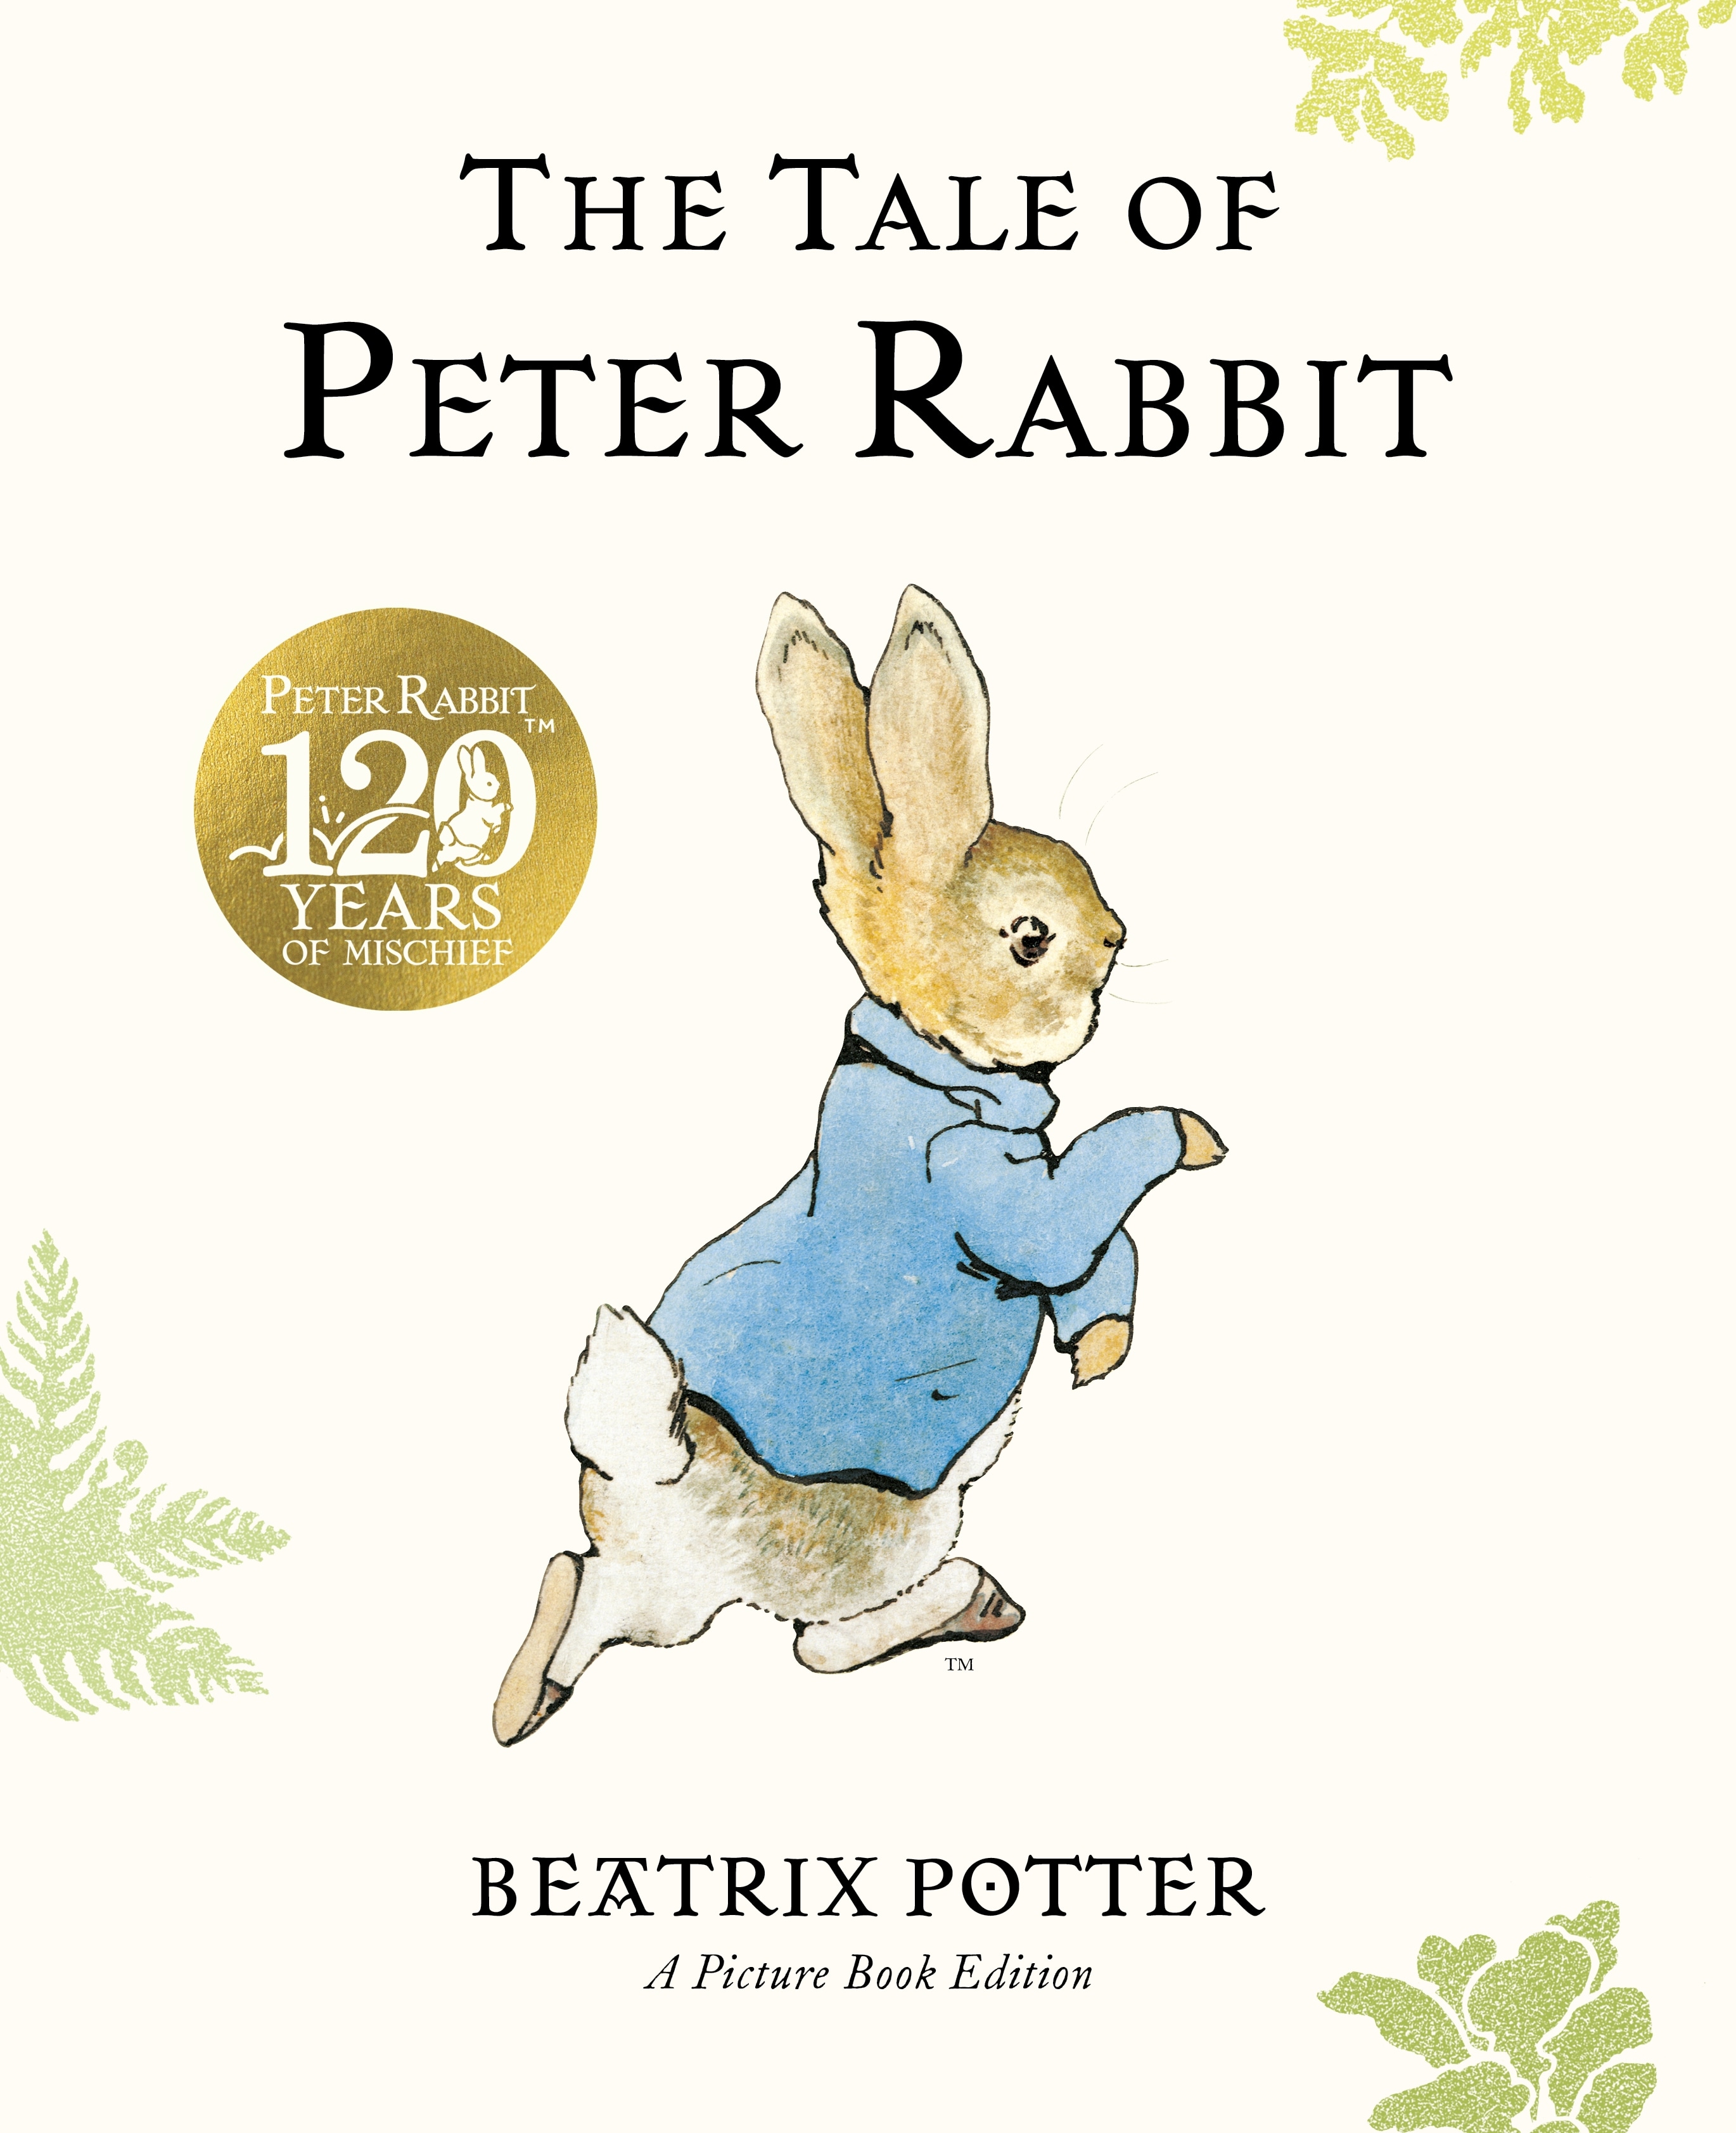 Book “The Tale of Peter Rabbit Picture Book” by Beatrix Potter — March 3, 2022